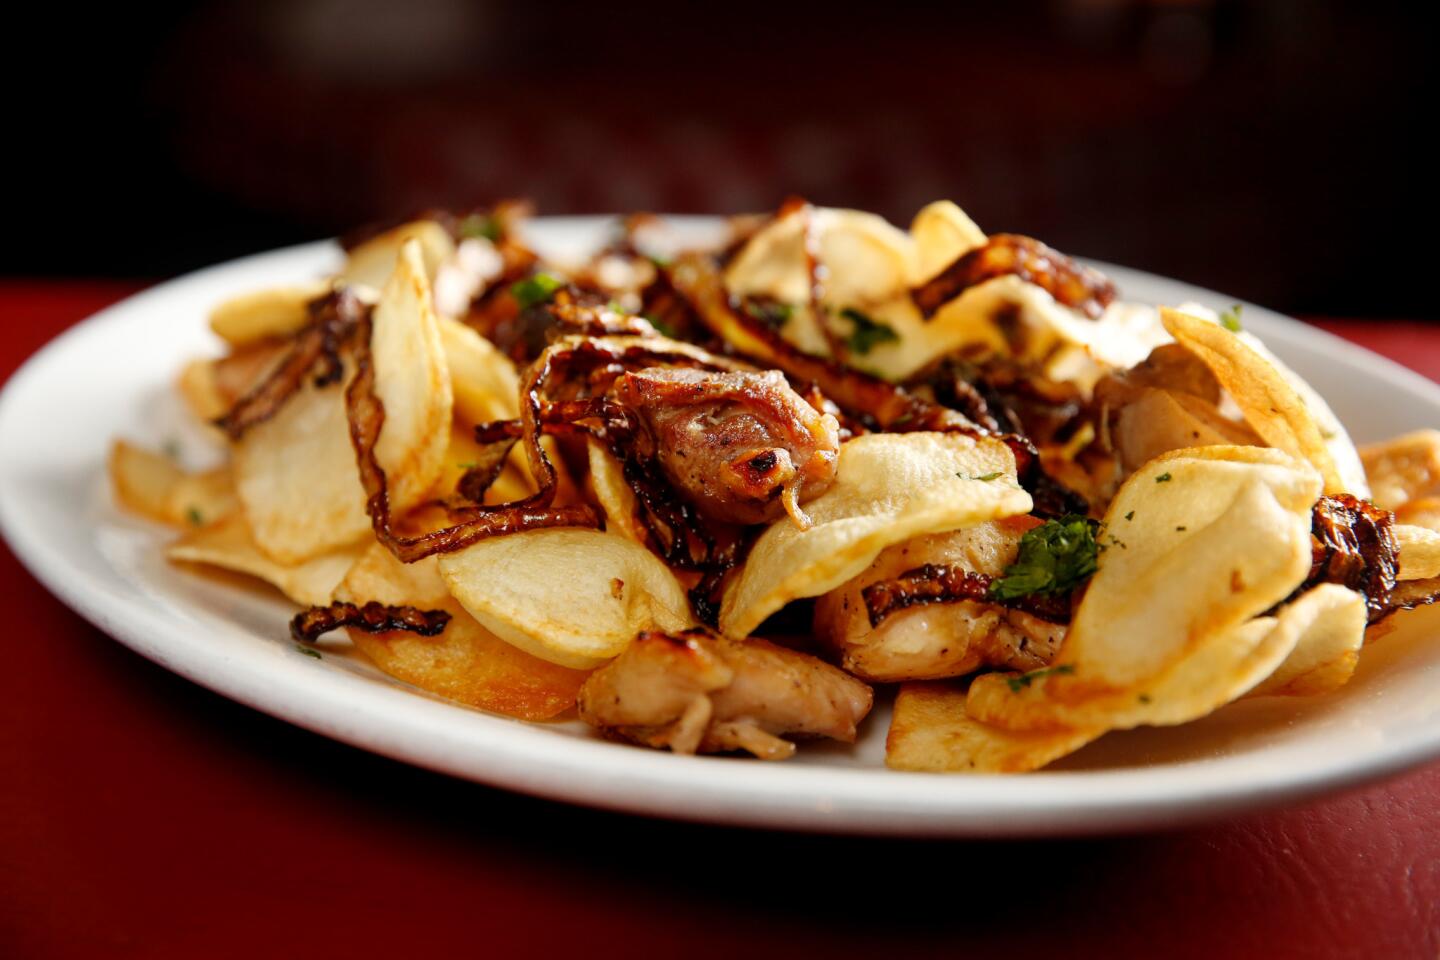 A lot of the dishes at Dan Tana's are named after people. The late Hollywood producer Sidney Beckerman's moniker is attached to this assemblage of freshly made potato chips, tender onions and garlic, as well as to a version in which all of this accompanies baked dark-meat chicken.